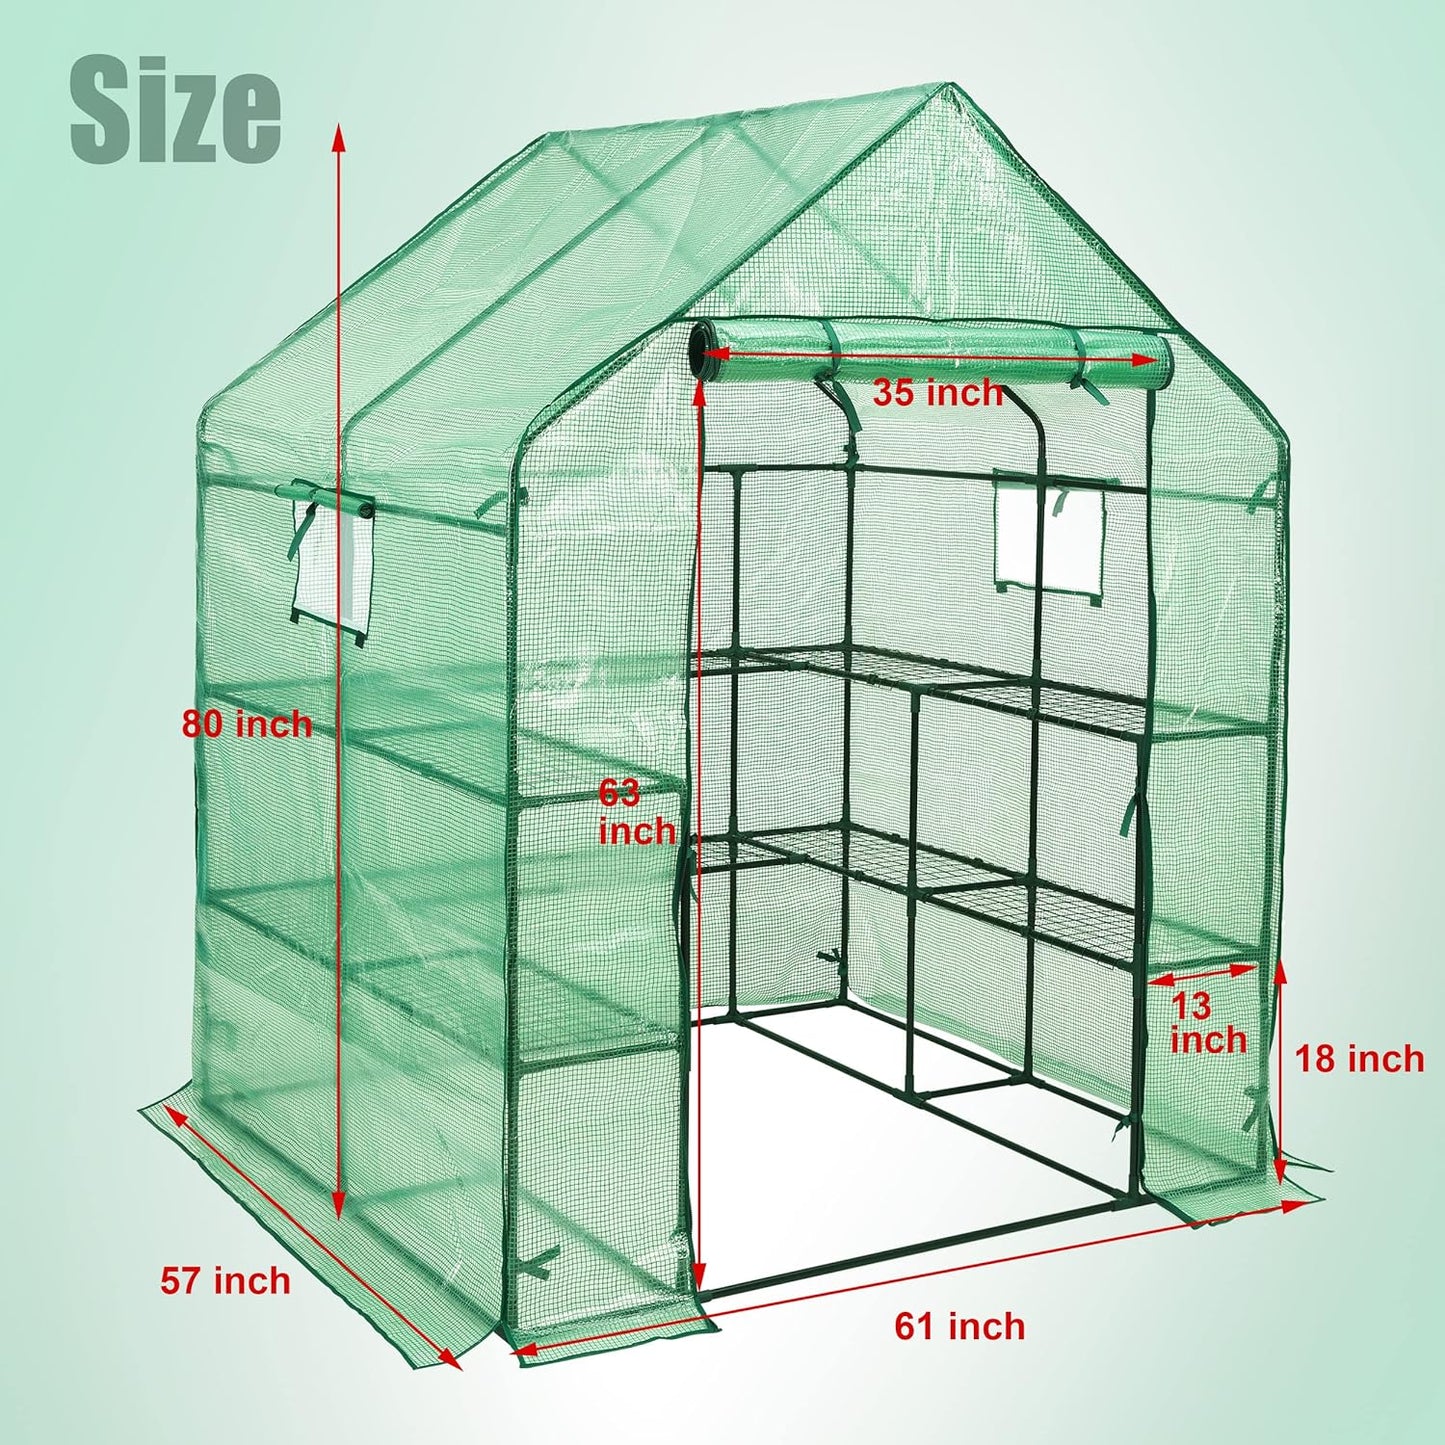 Walk-In Greenhouse for Outdoors, 57X61X80 Inch Large Greenhouse, 3 Tiers 10 Shelves Mini Green House Kit with Observation Windows Roll-Up Door Zipper, Plant Garden Hot House for Herbs, Flowers - Design By Technique